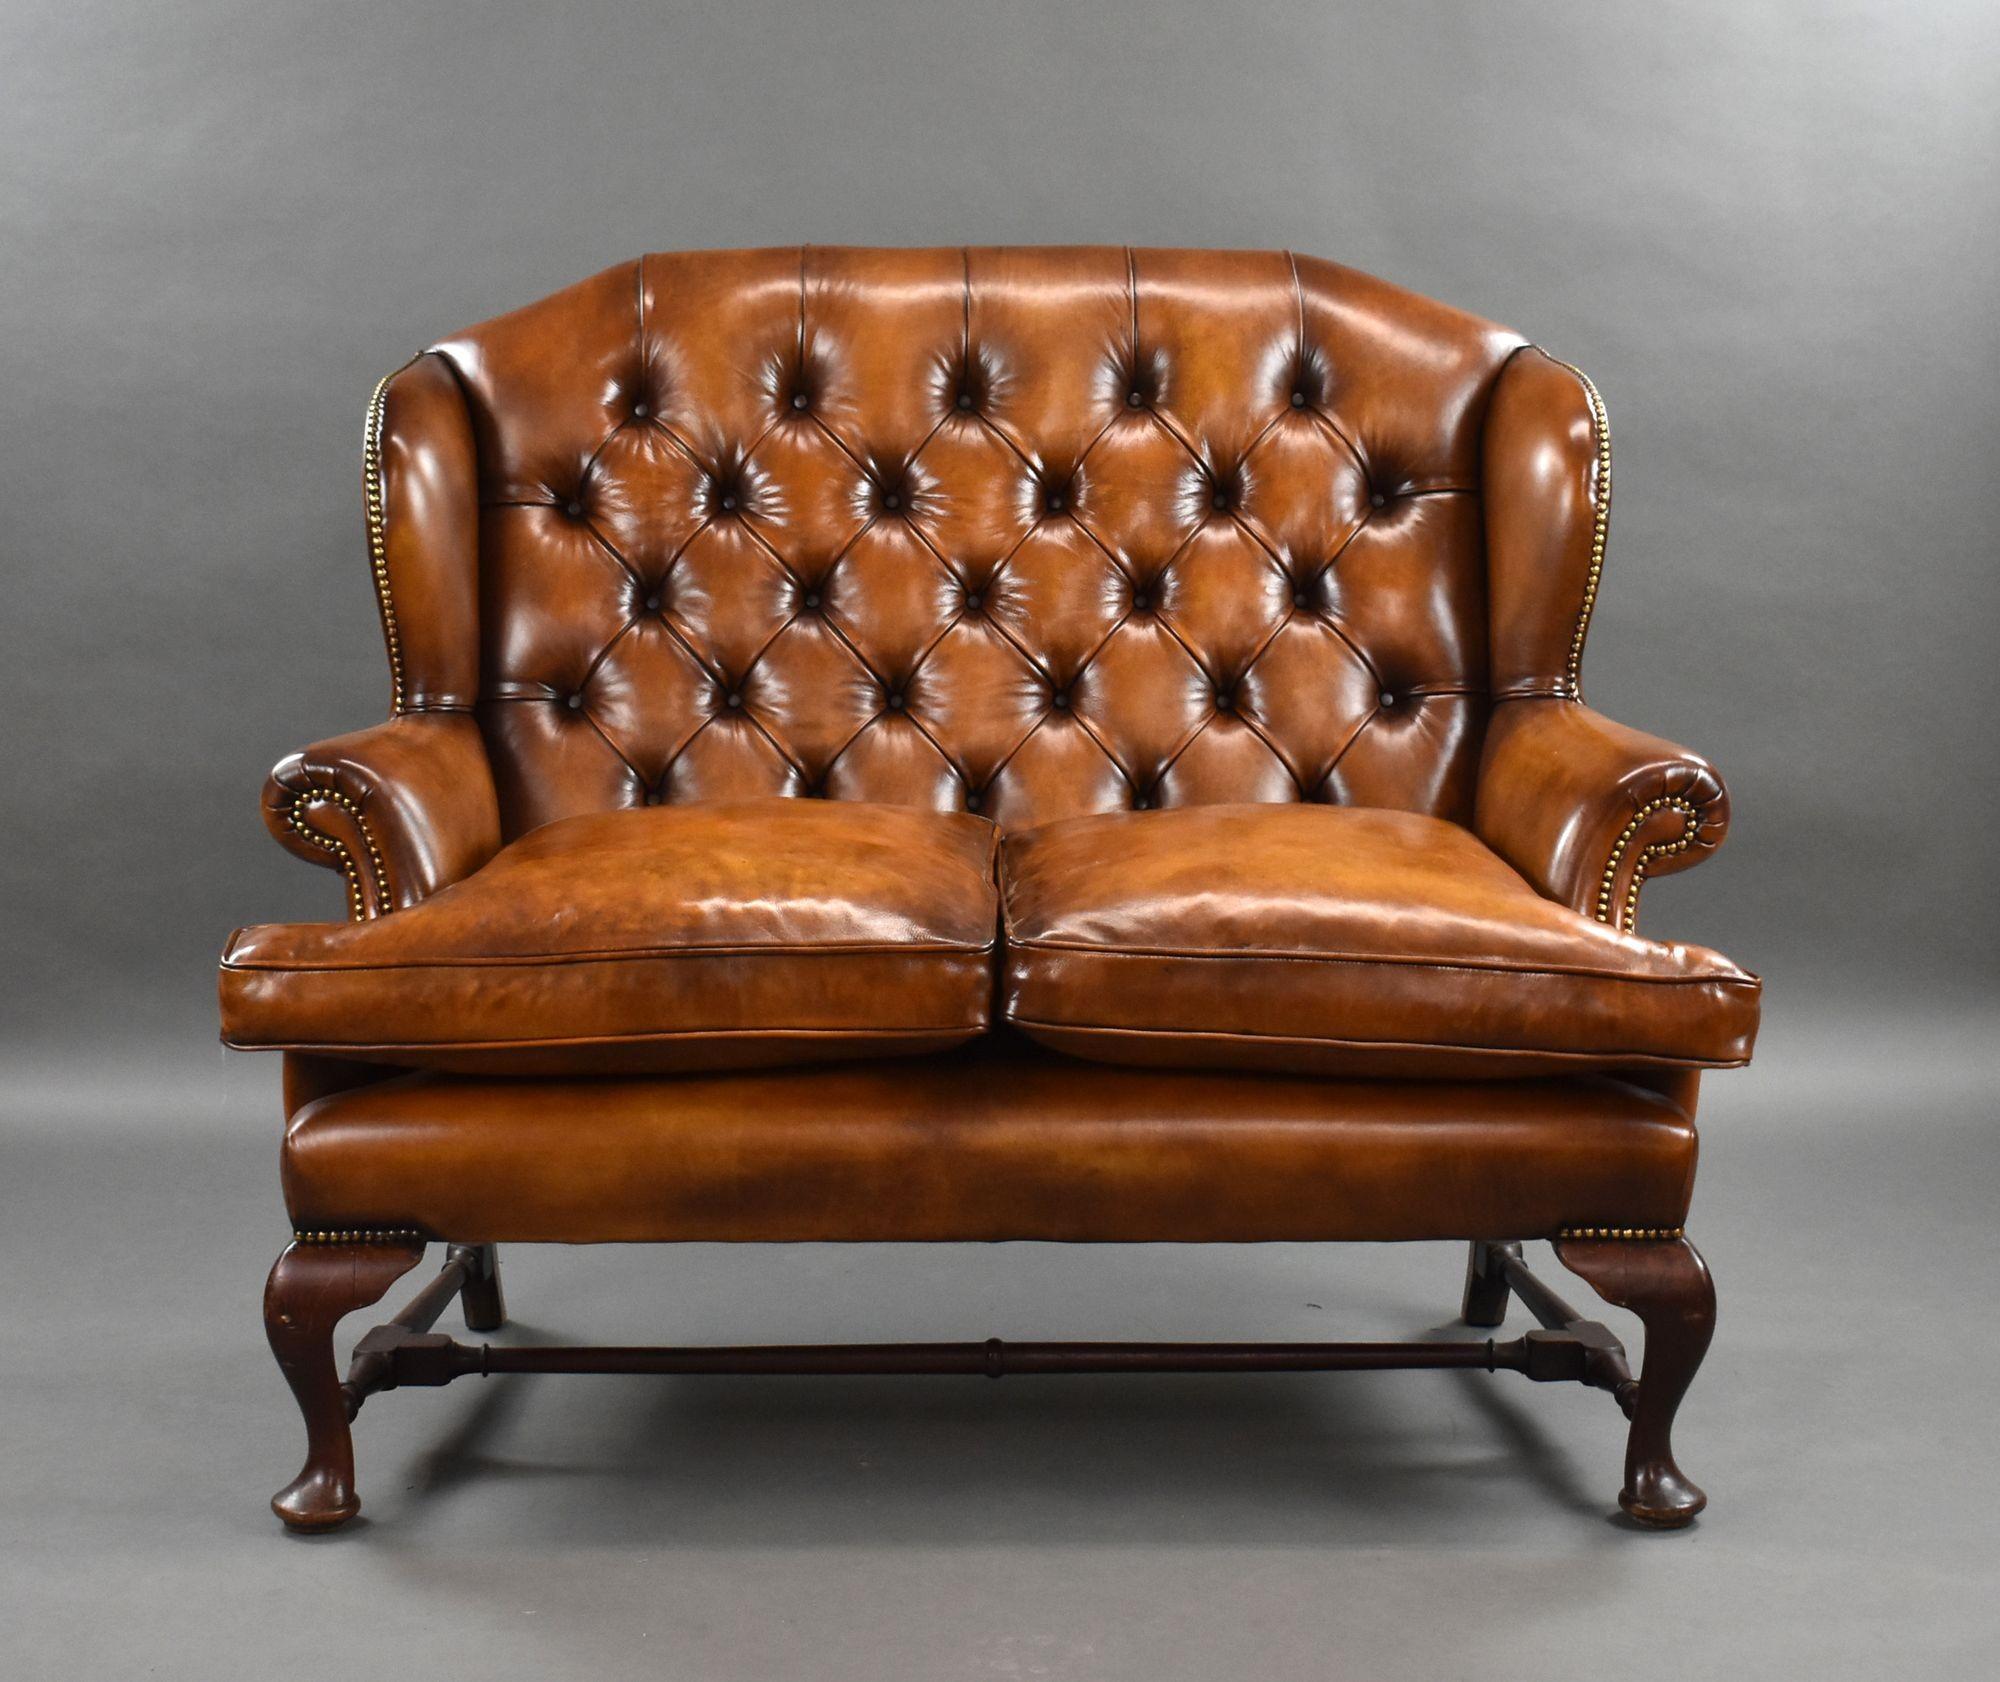 For sale is a good quality 19th century hand dyed leather wing back sofa, having a deep buttoned back, flanked by two wings above two feather stuffed cushions. The sofa stands on elegant cabriole legs united by a stretcher. The sofa is upholstered